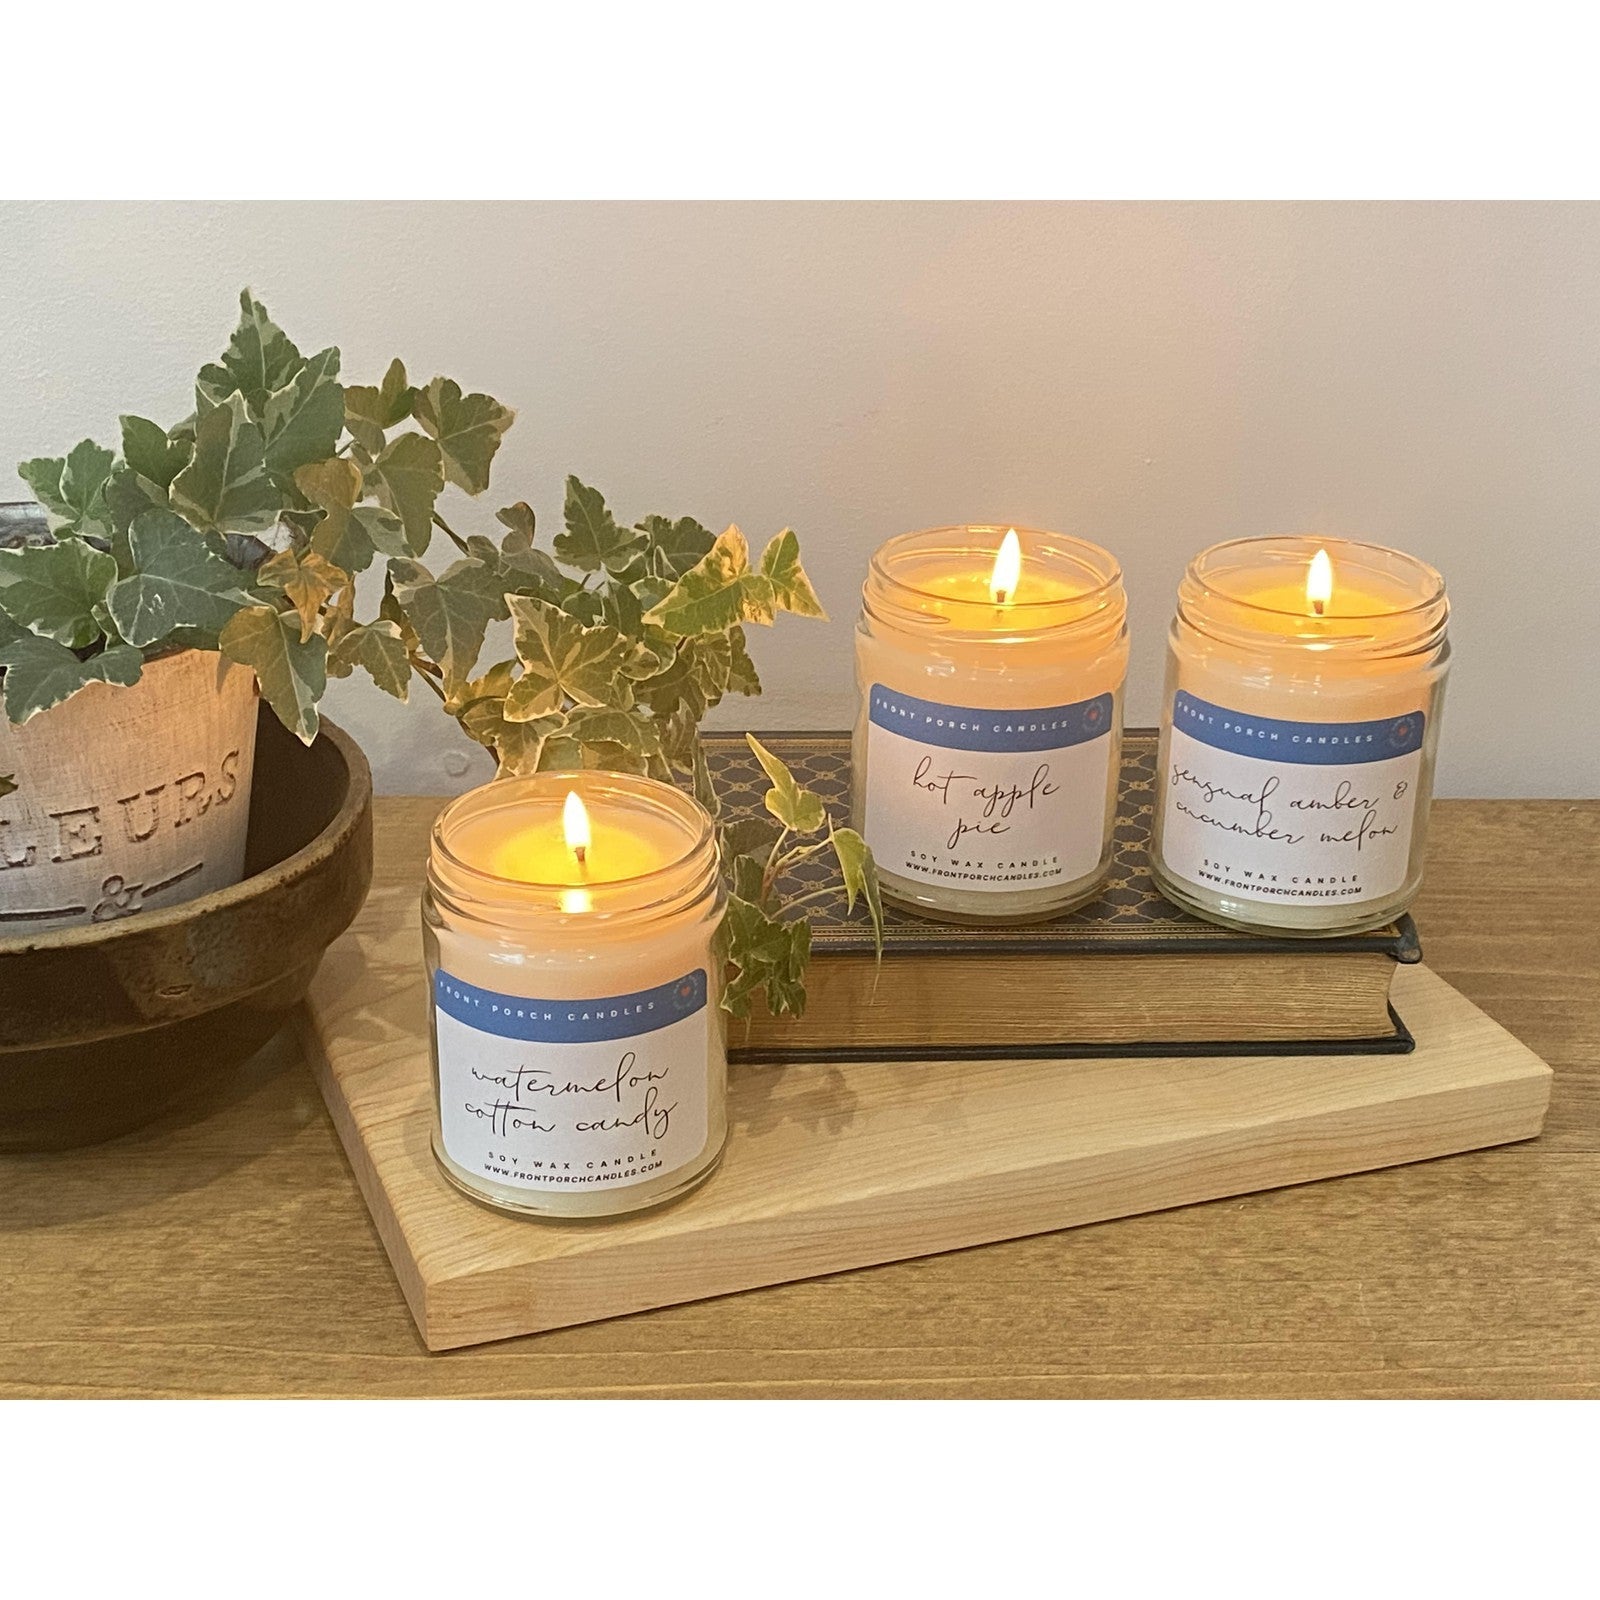 Beach Breeze & Coconut Cream- Soy Candle - Front Porch Candles